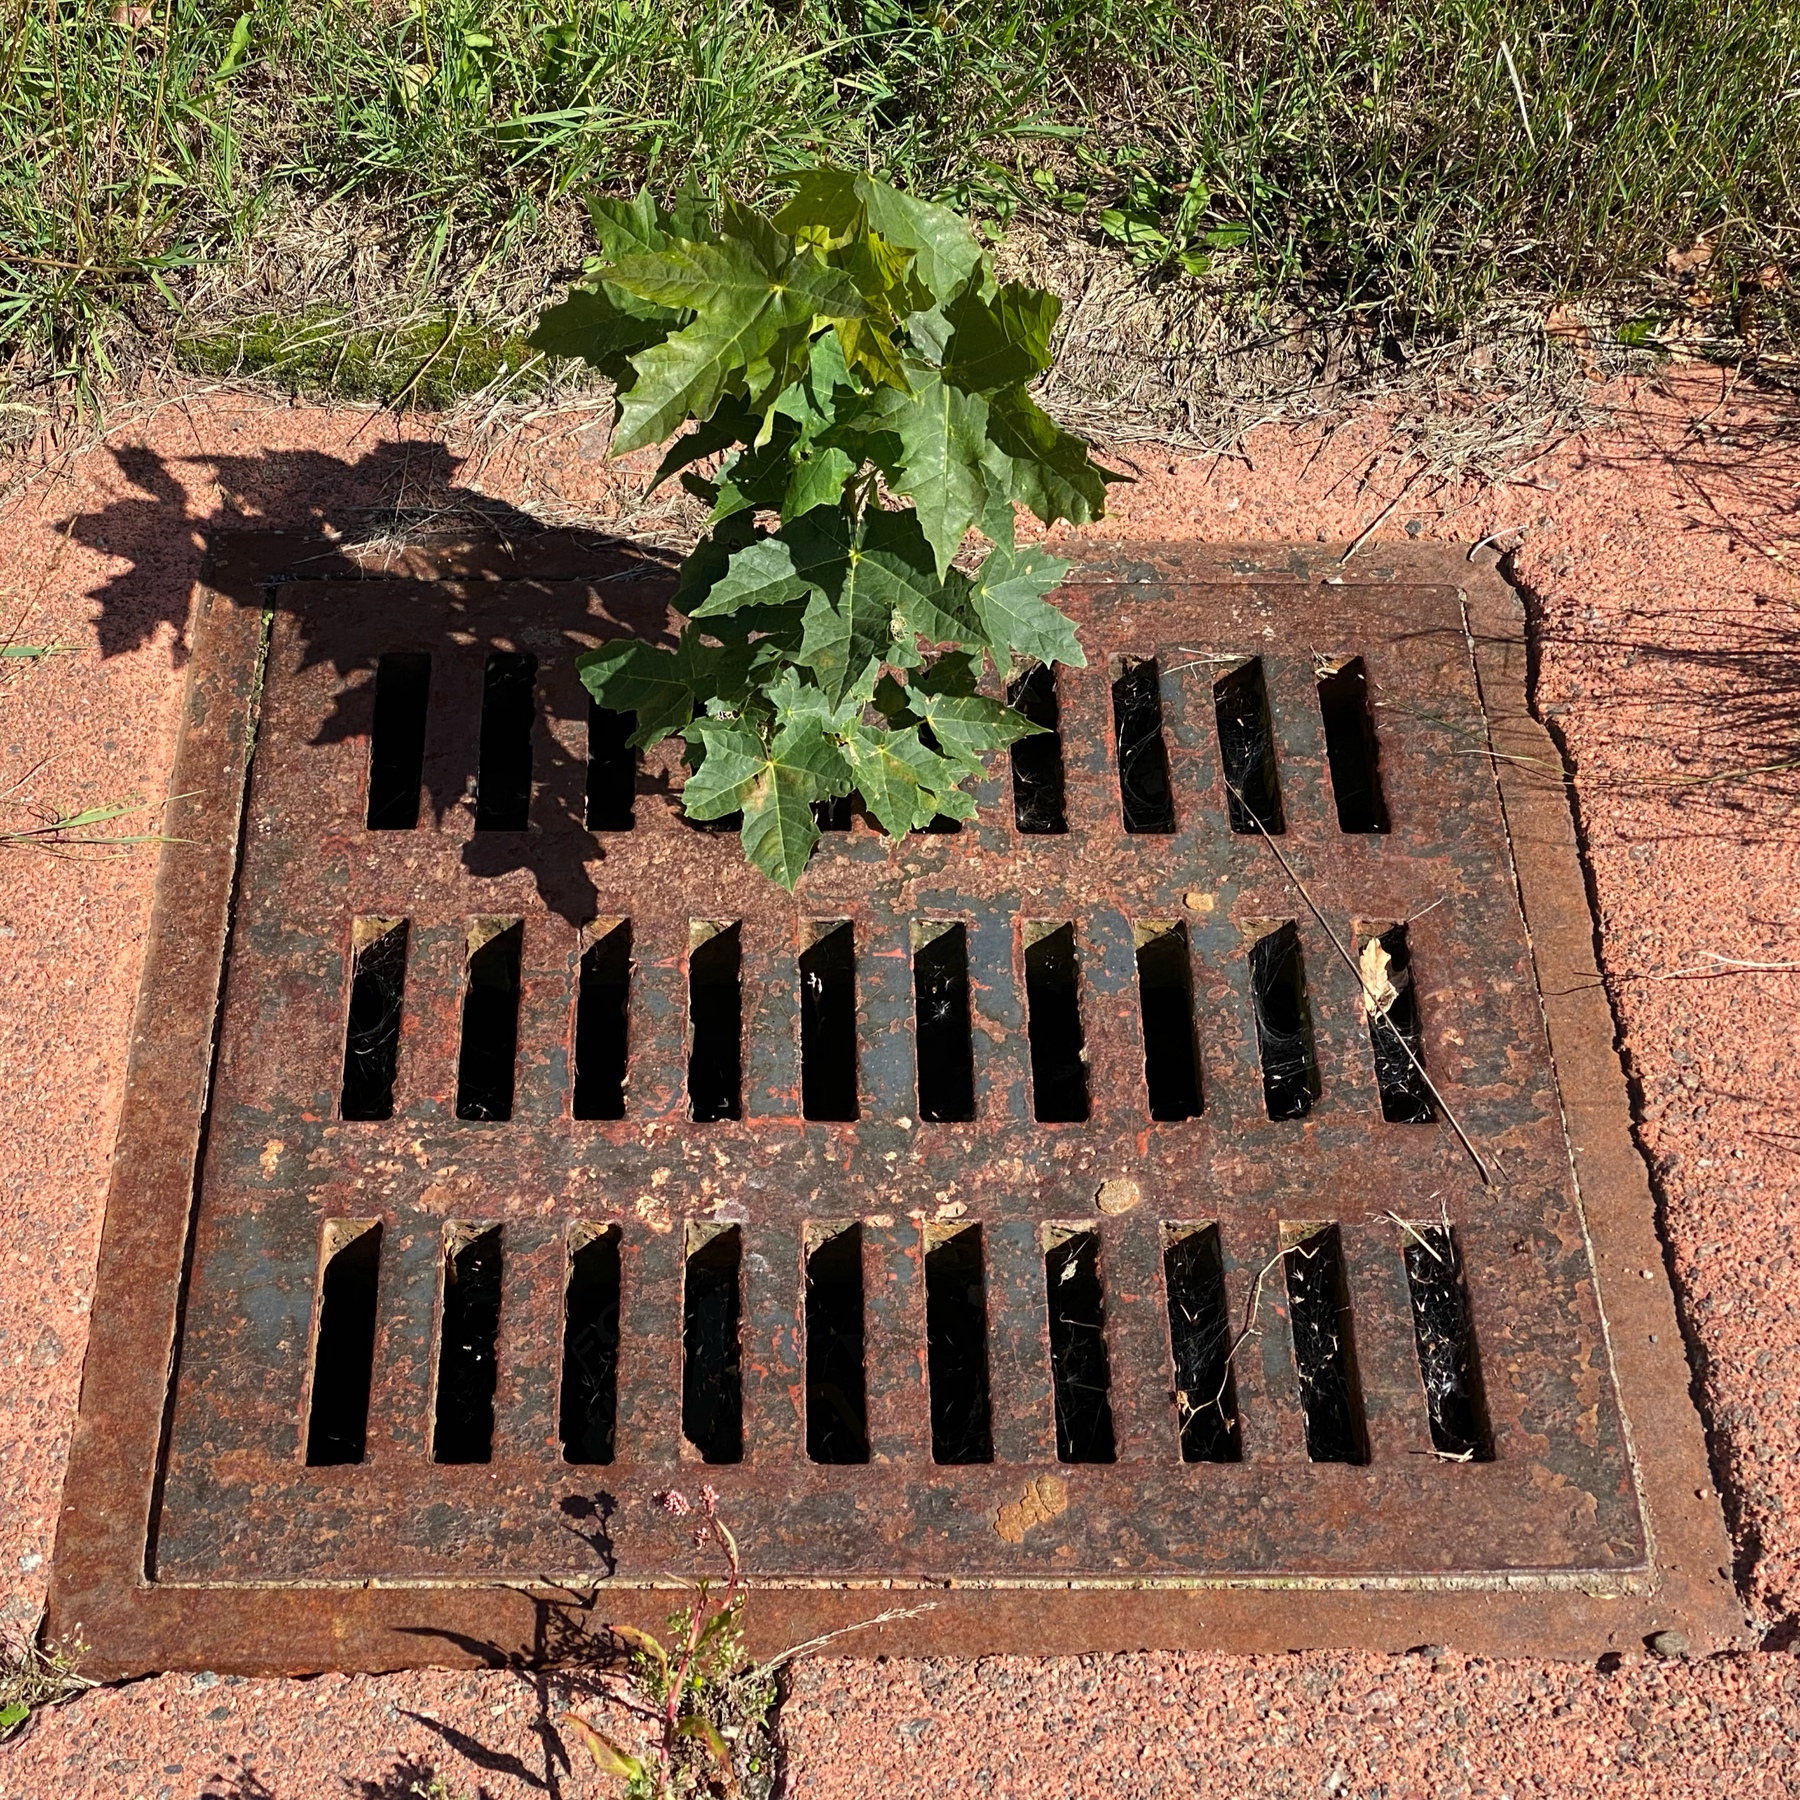 Plant growing out of sewer grate.